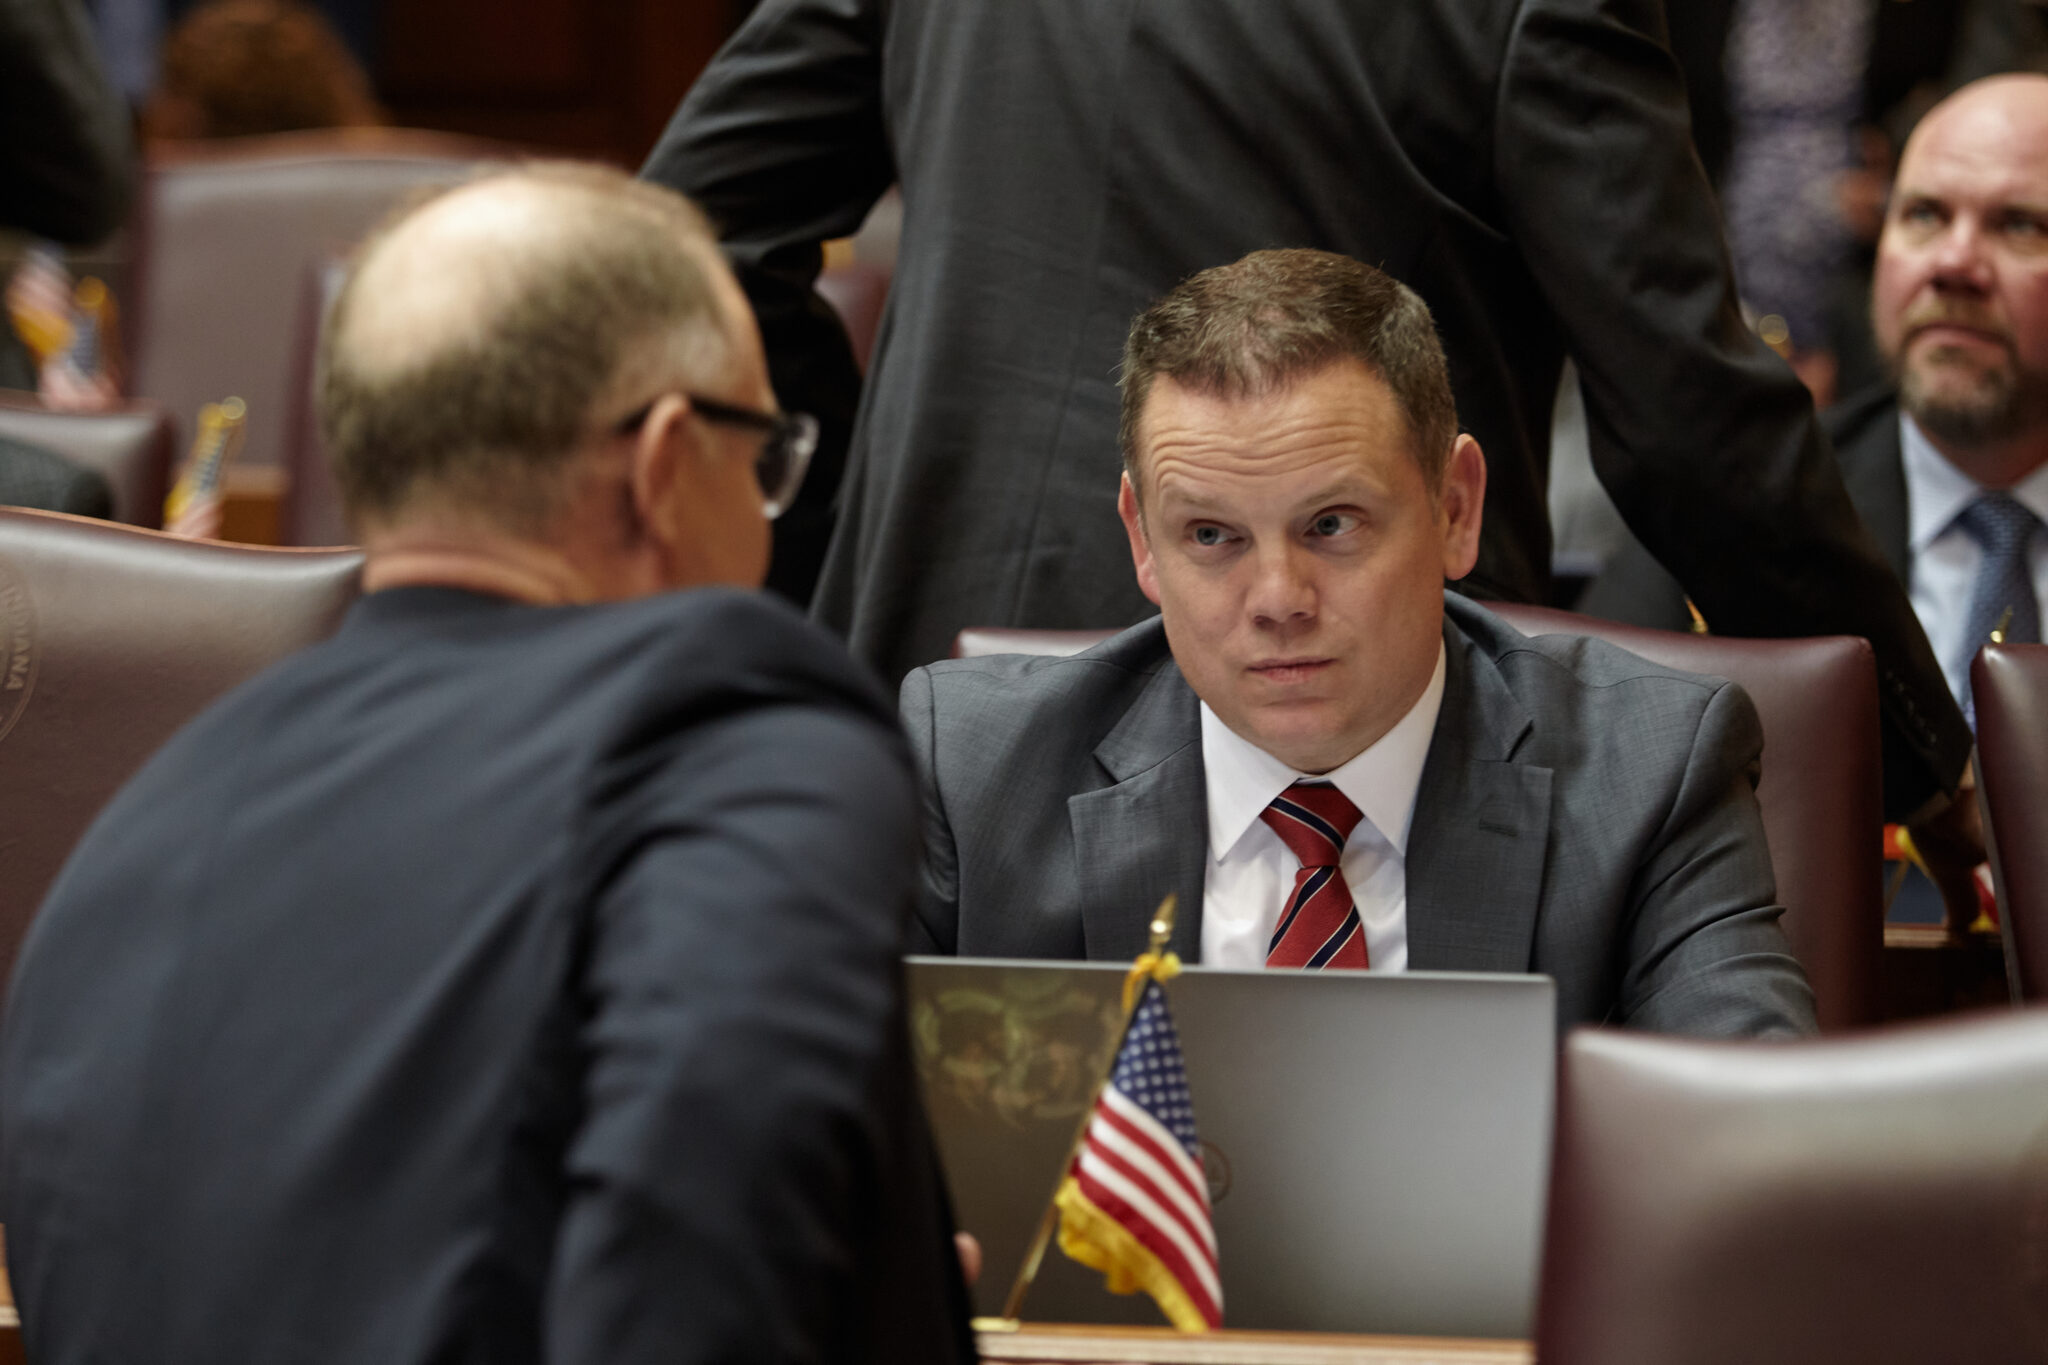  Rep. Chris Jeter, R-Fishers, is pushing a bill that would open up who could wholesale popular seltzers. (Photo by Monroe Bush for Indiana Capital Chronicle)